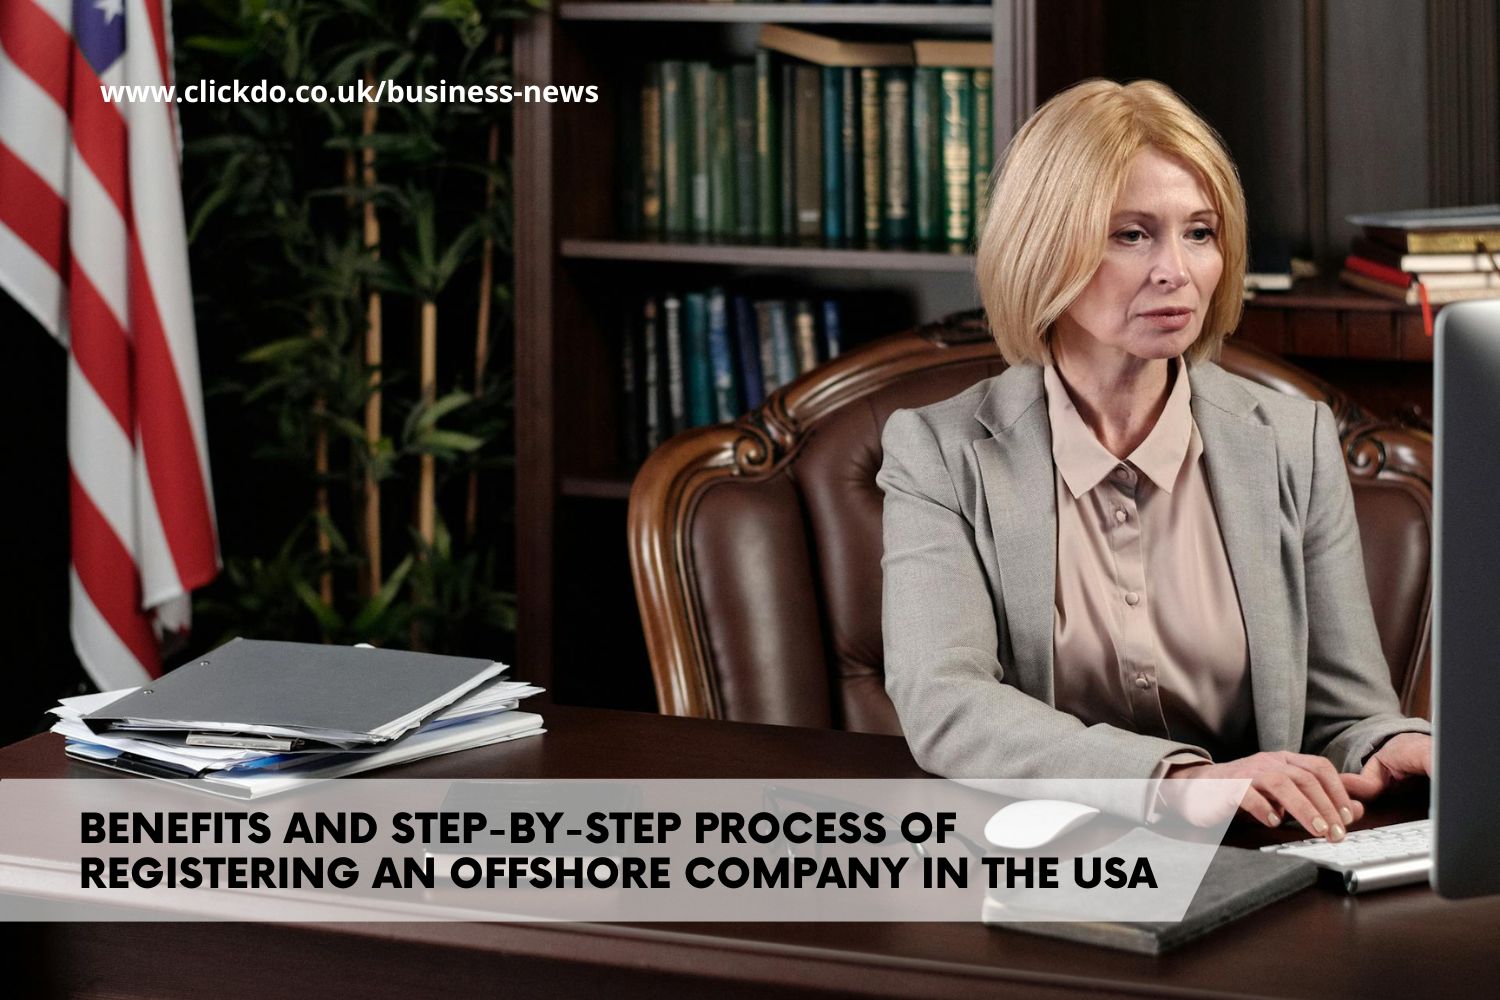 how-to-register-an-offshore-company-in-the-usa